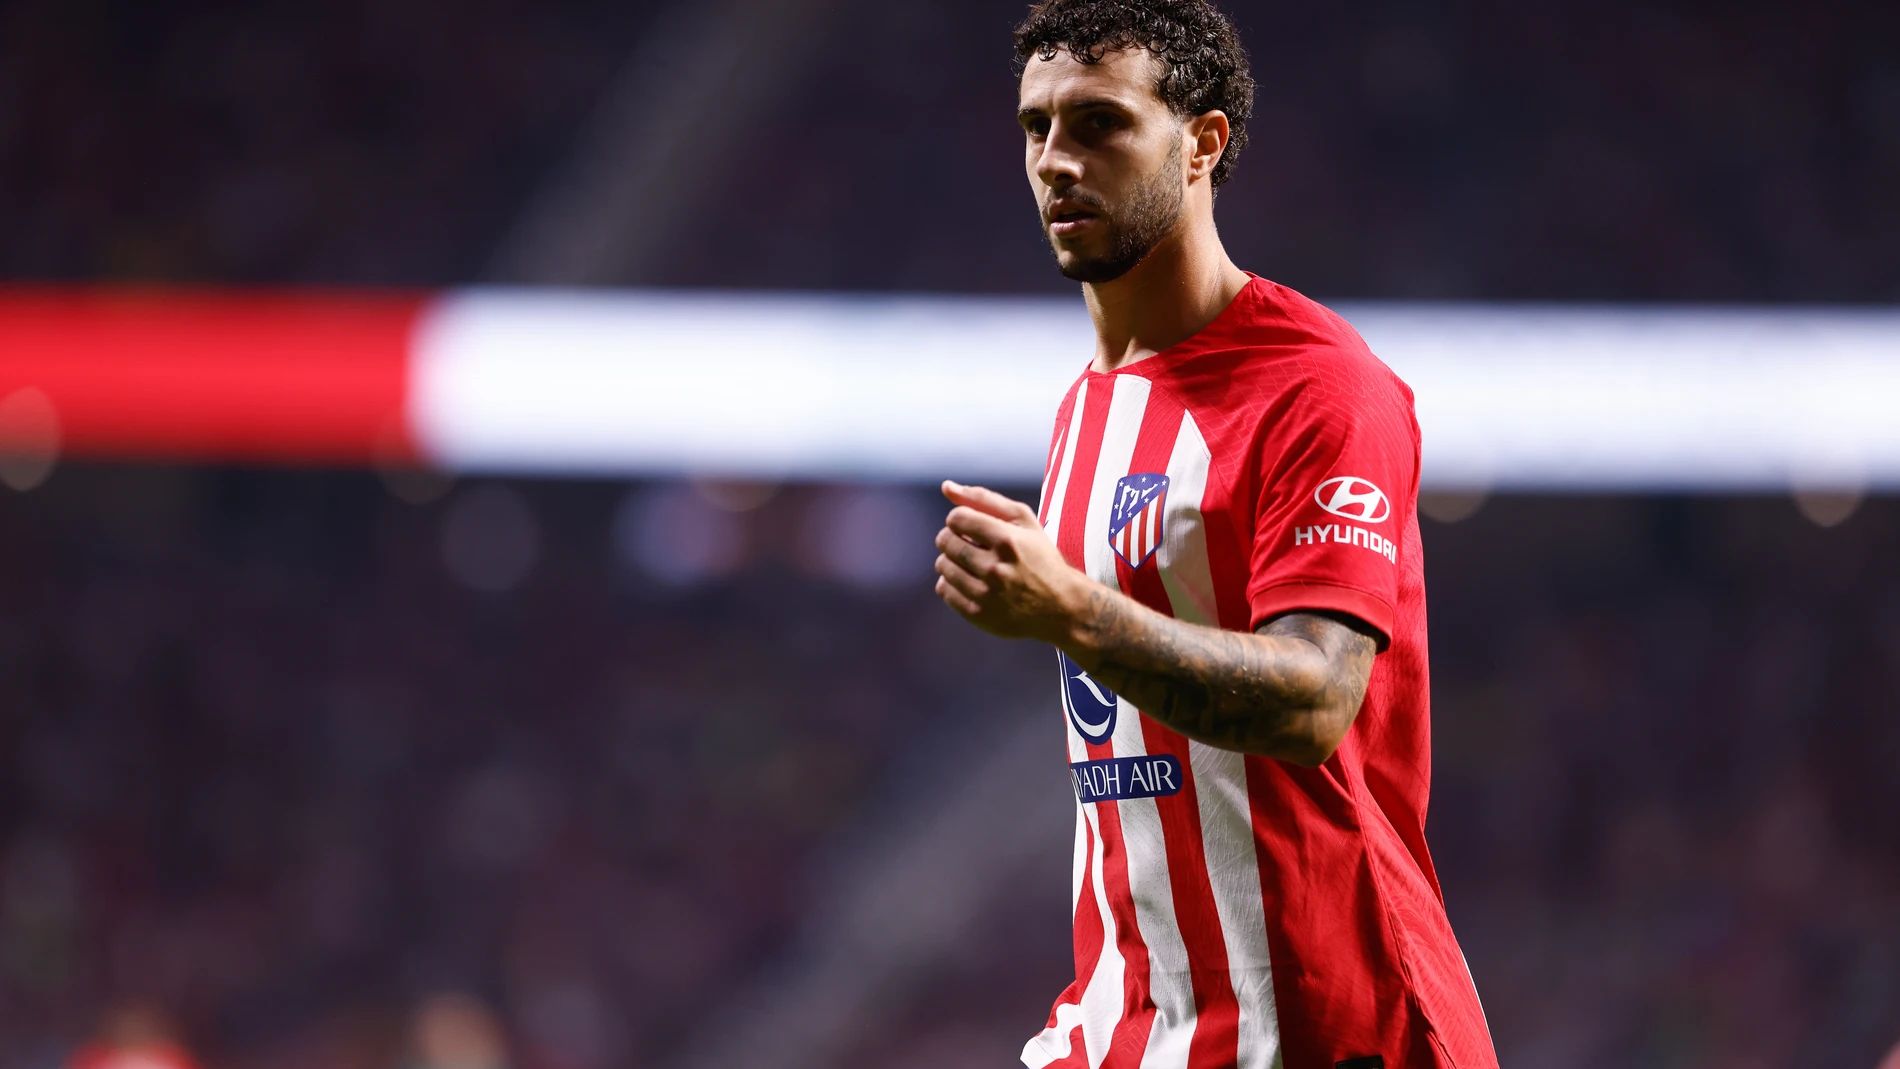 Besiktas meeting with agent of Atletico Madrid defender, pursuing ex-Real Madrid winger